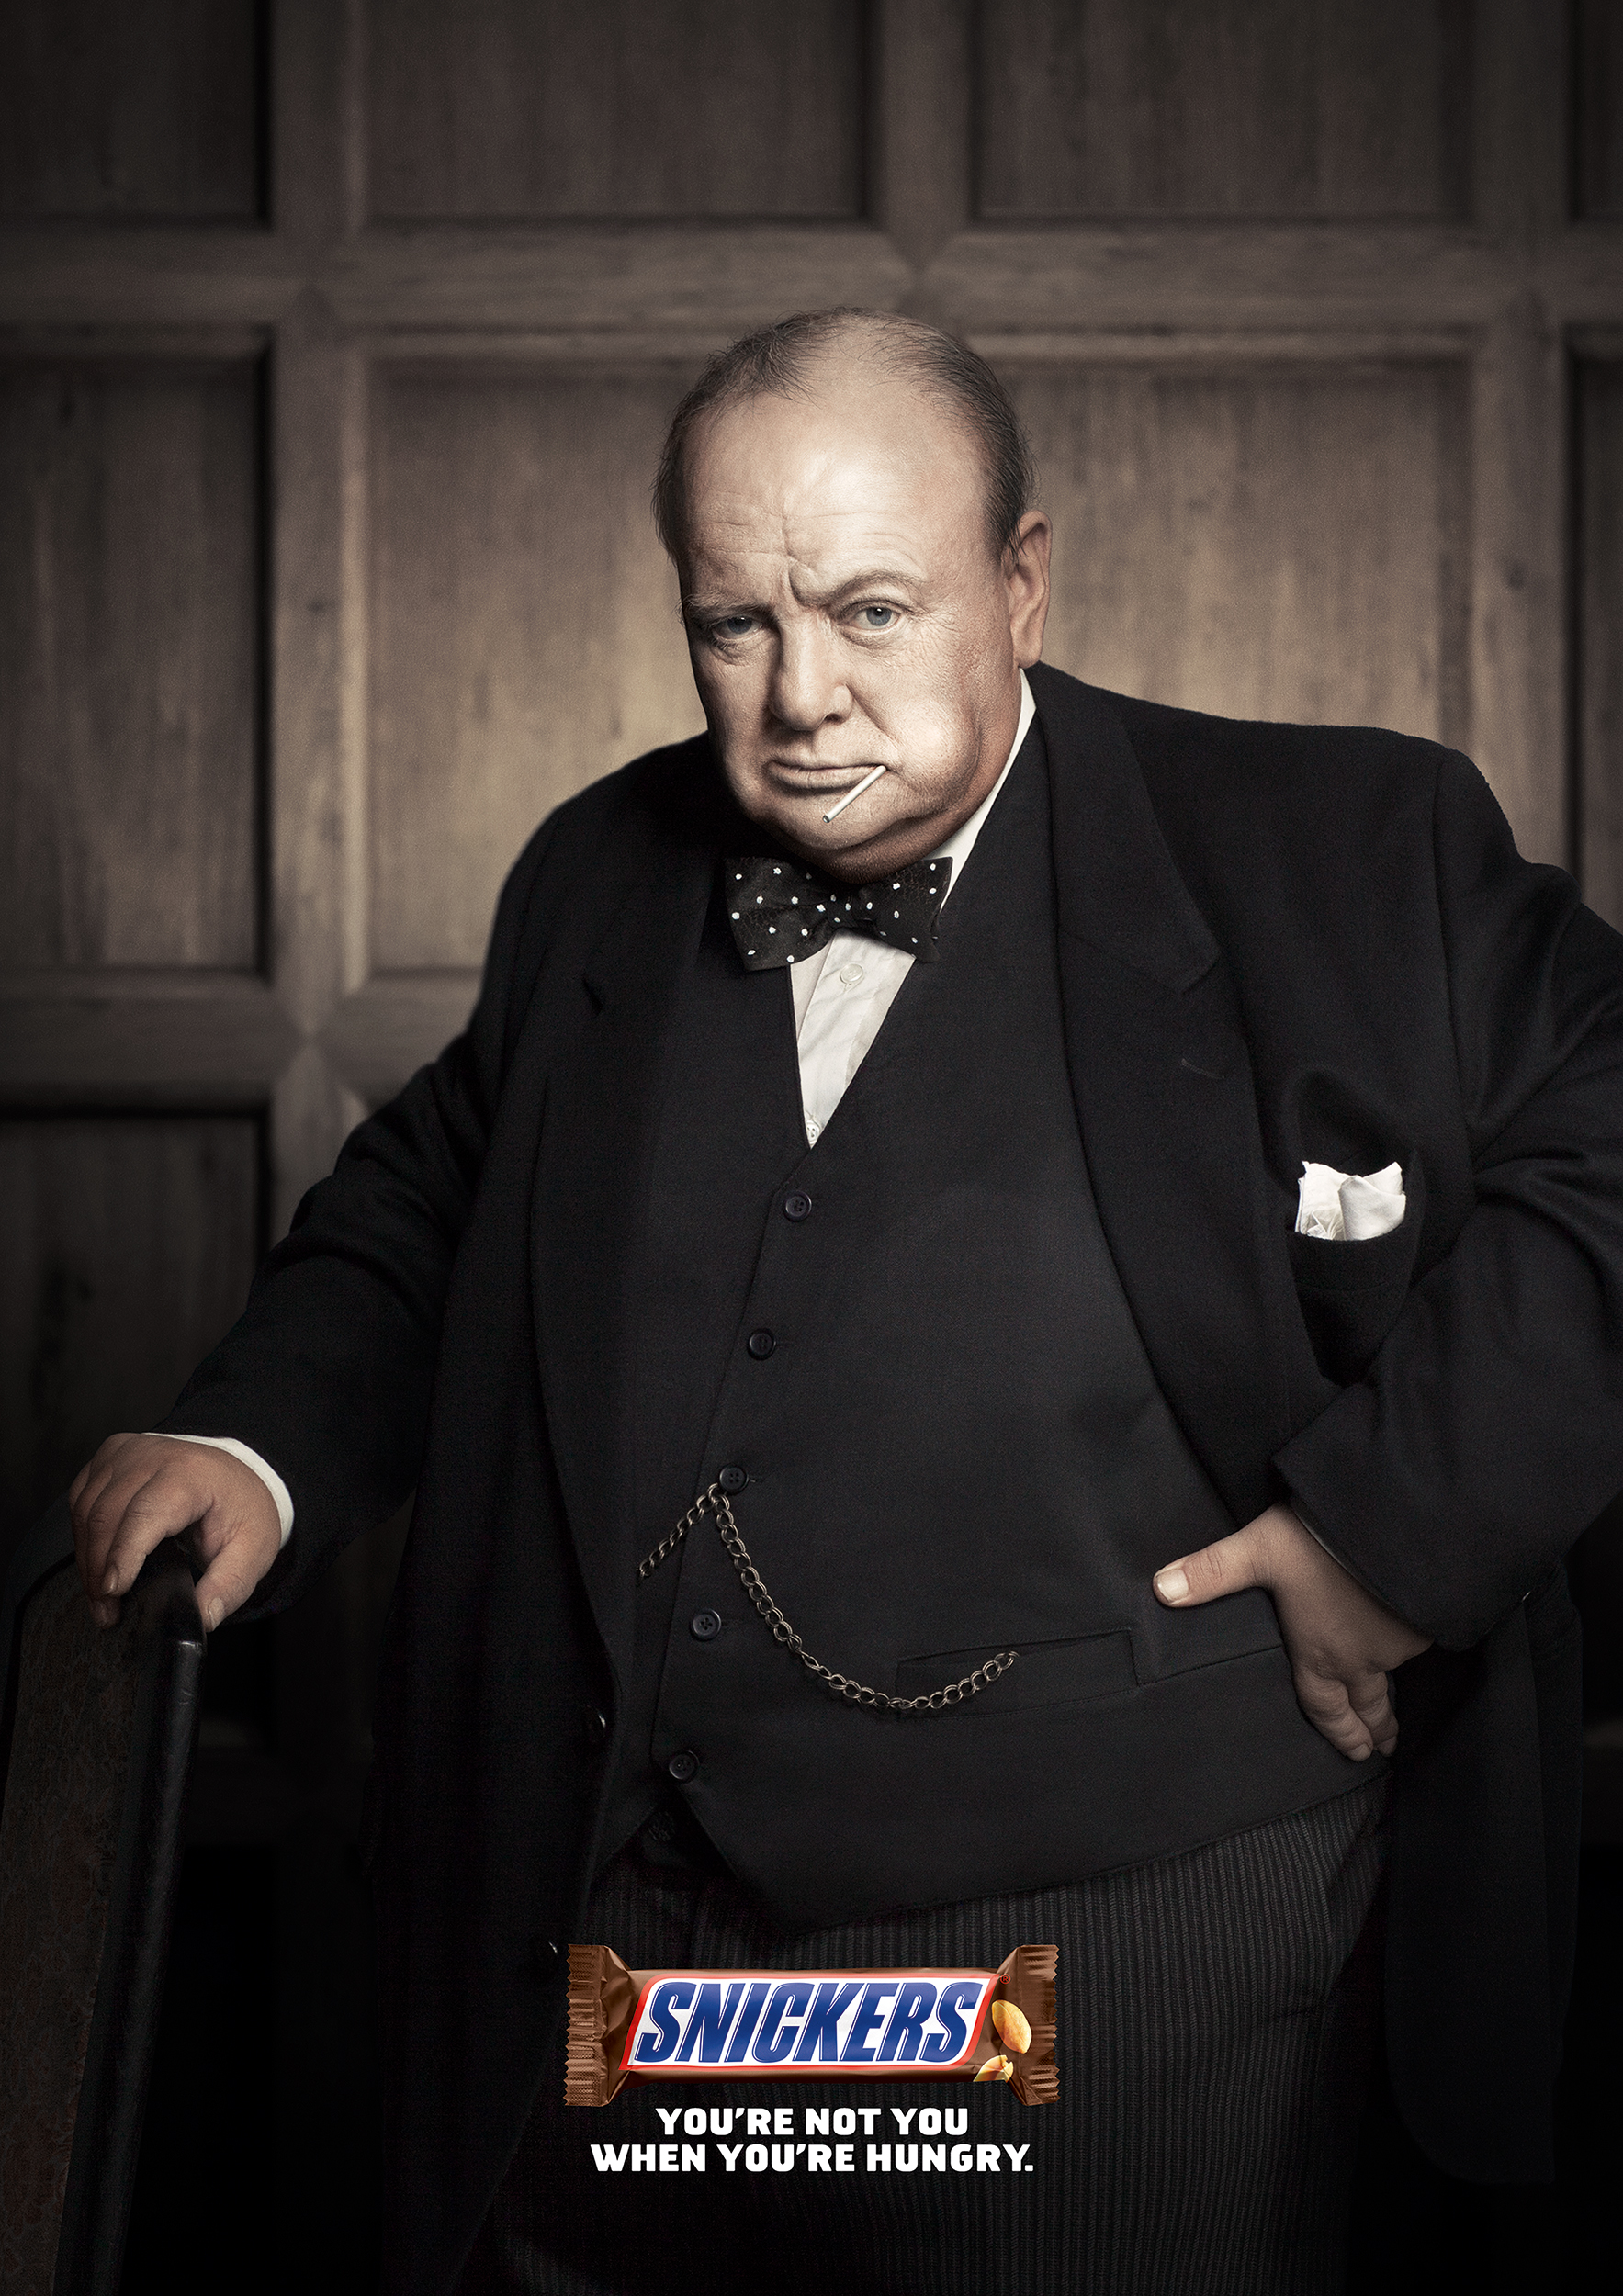 You're not you: British Edition. Churchill